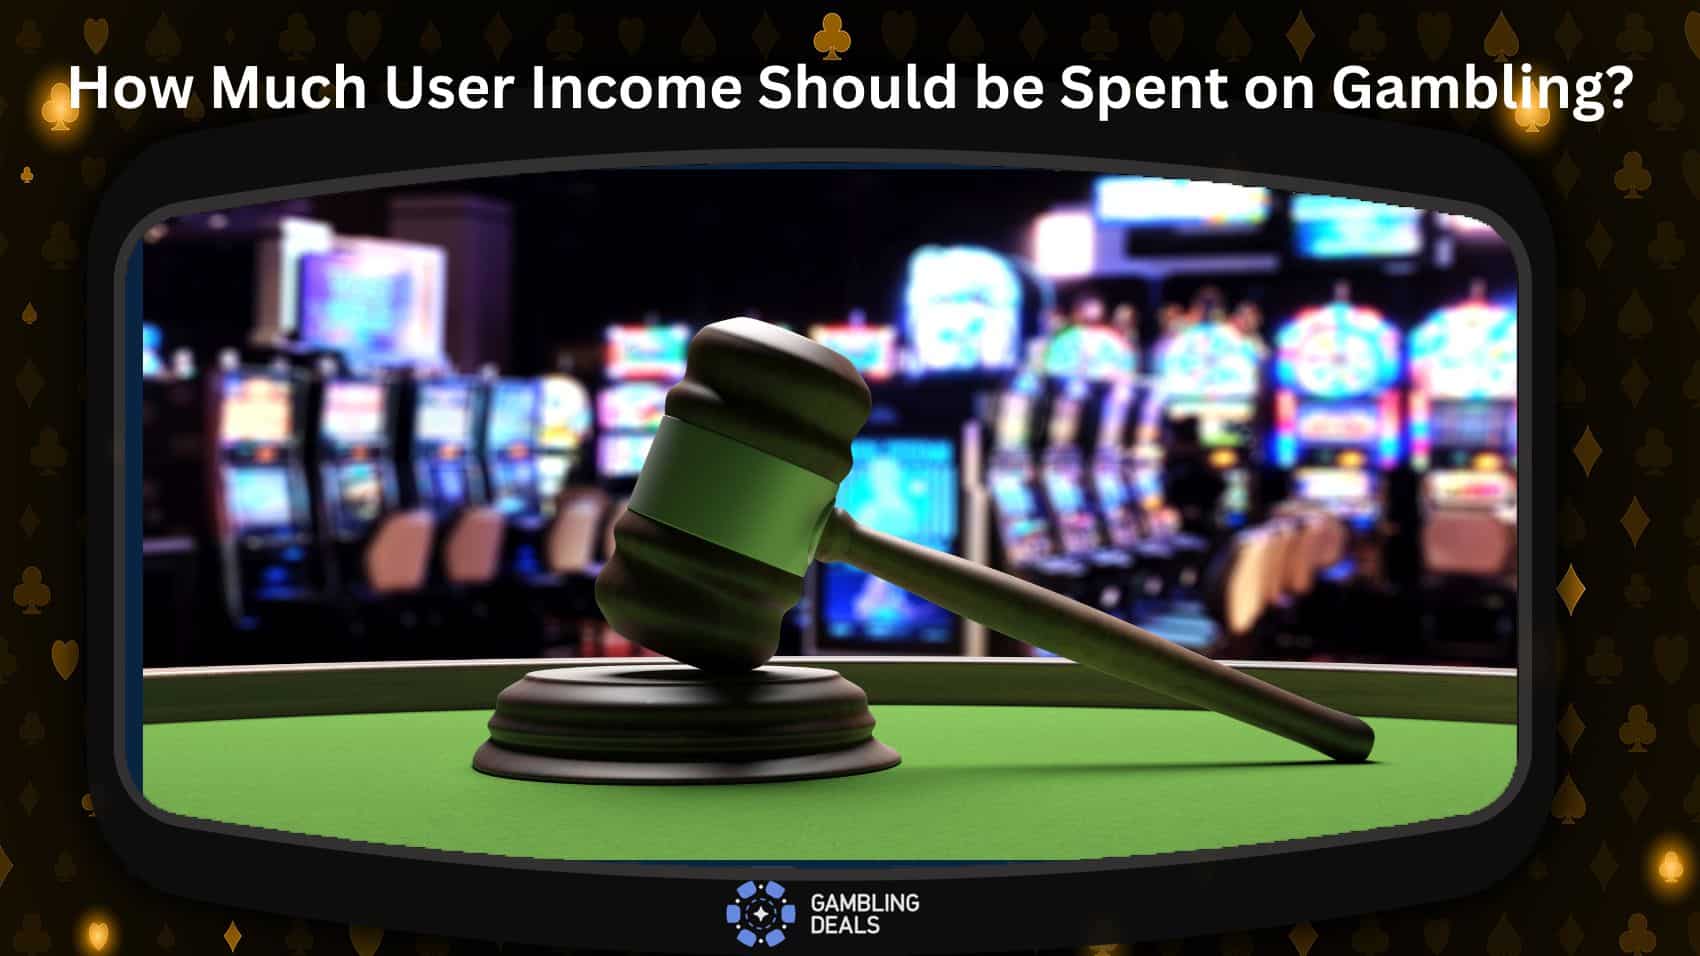 How Much User Income Should be Spent on Gambling